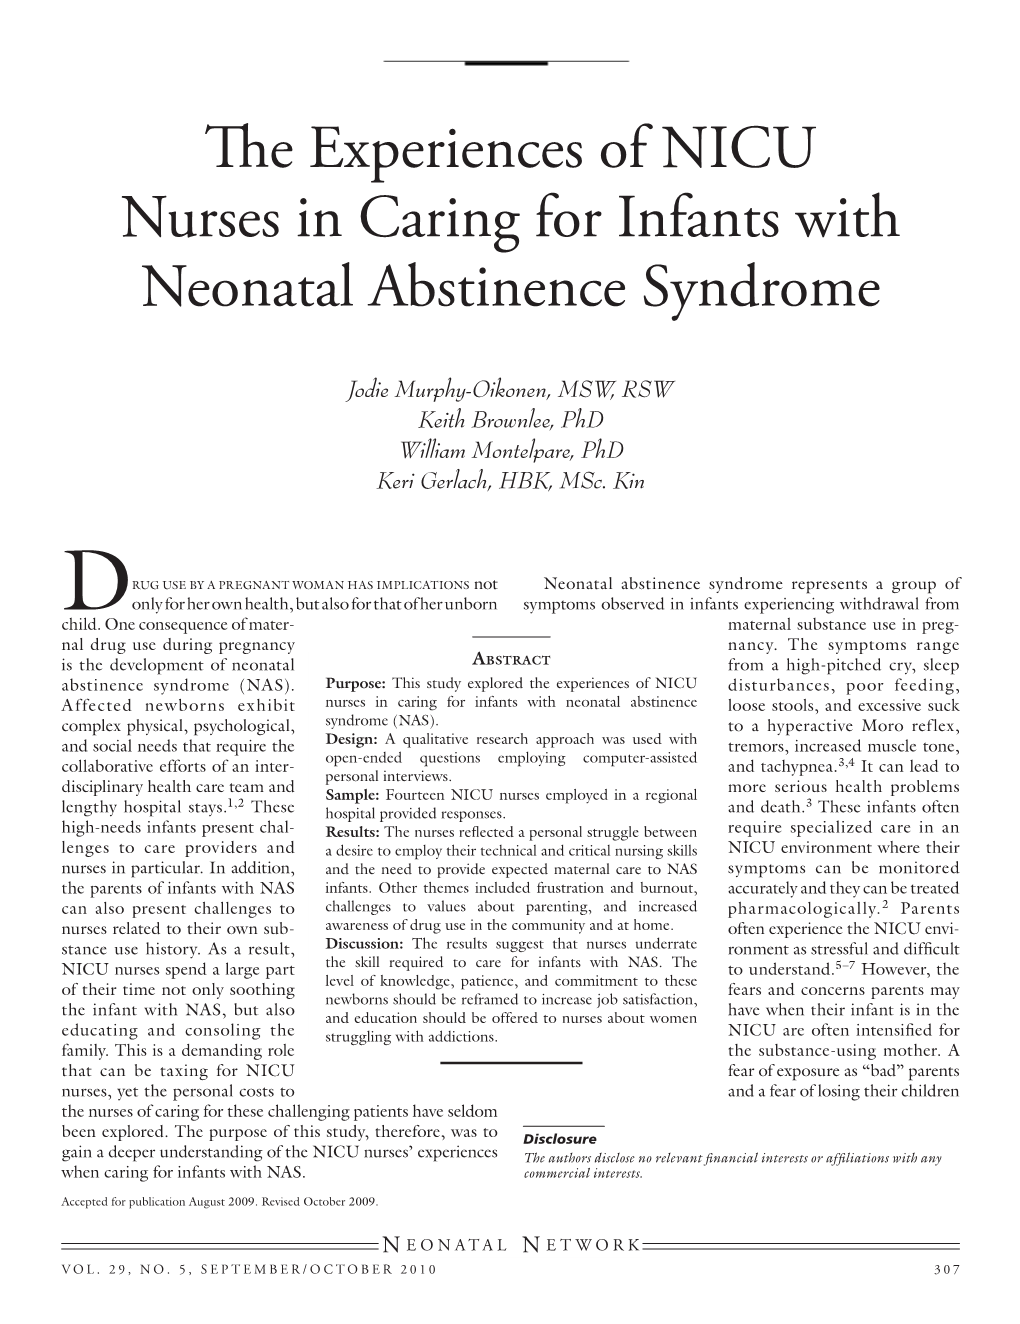 The Experiences of NICU Nurses in Caring for Infants with Neonatal Abstinence Syndrome